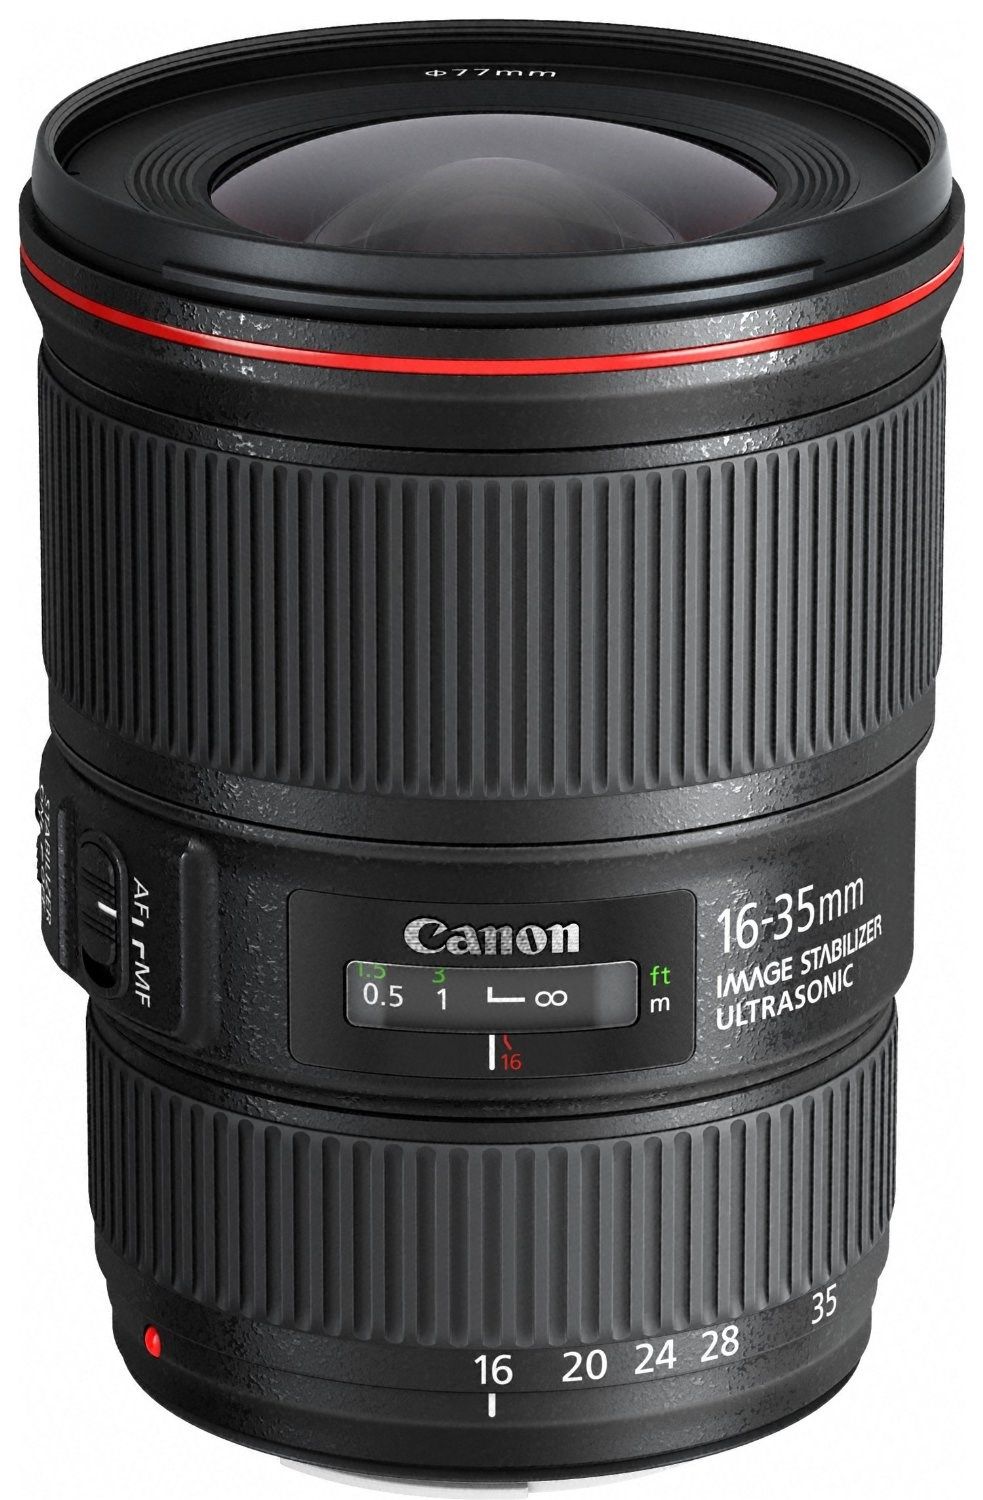 Canon EF 16-35mm f4 L IS USM Ultra Wide-Angle Zoom Lens - Product Photo 3 - Top Down View